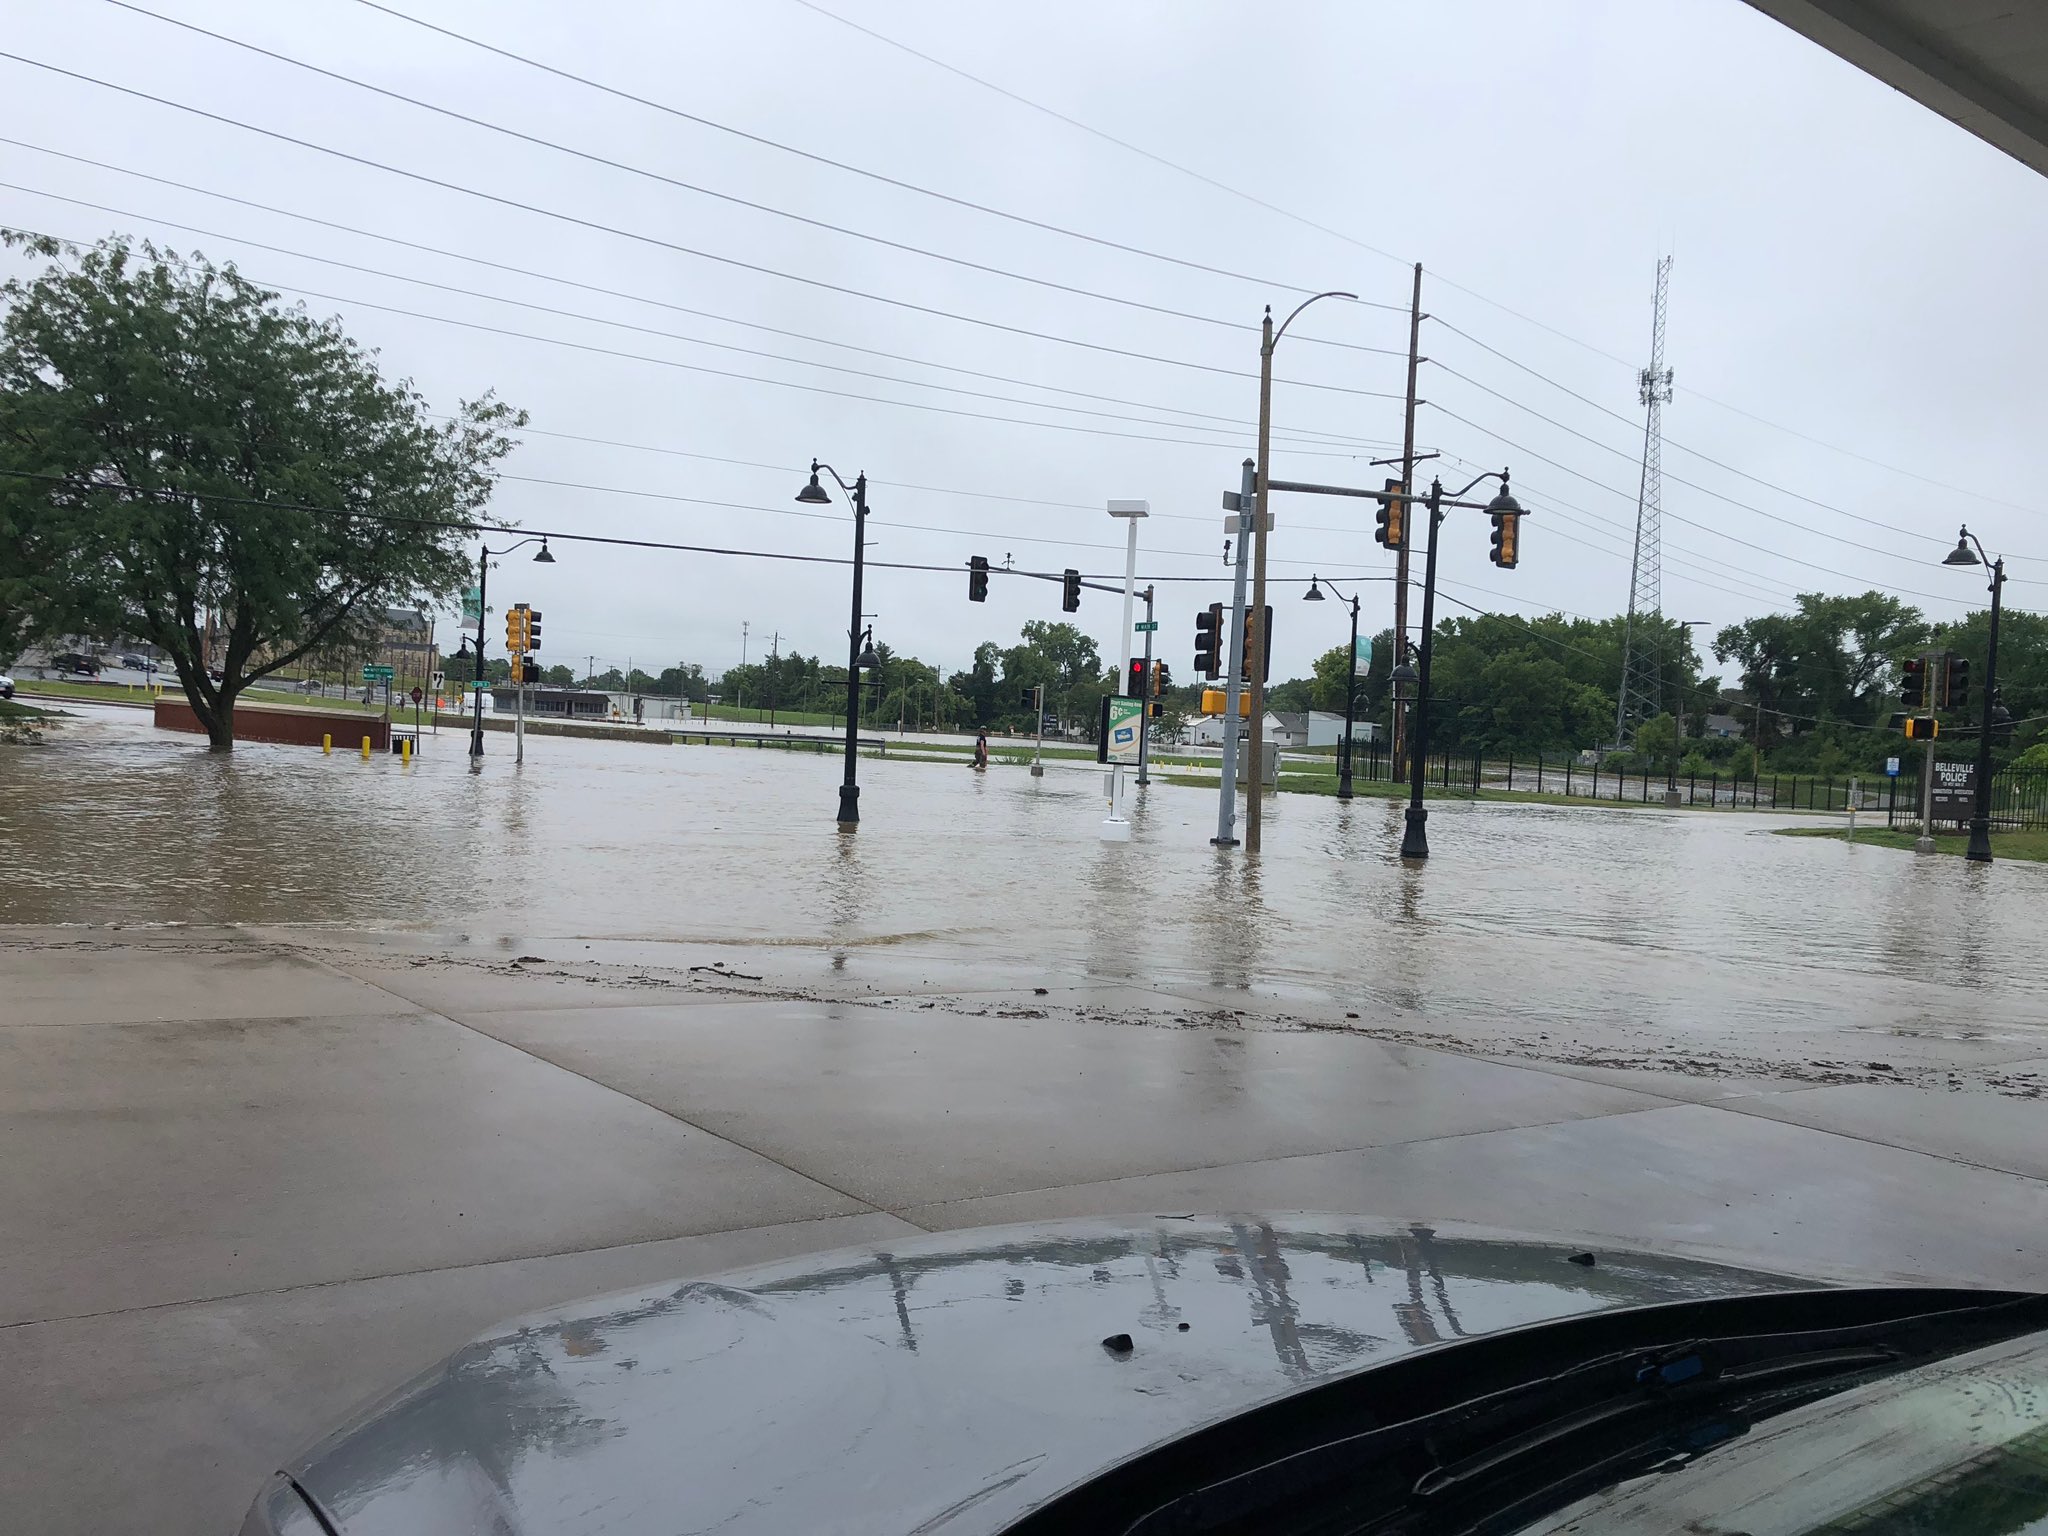 Flooding on Richland Creek at W. Main Street in Belleville, IL.